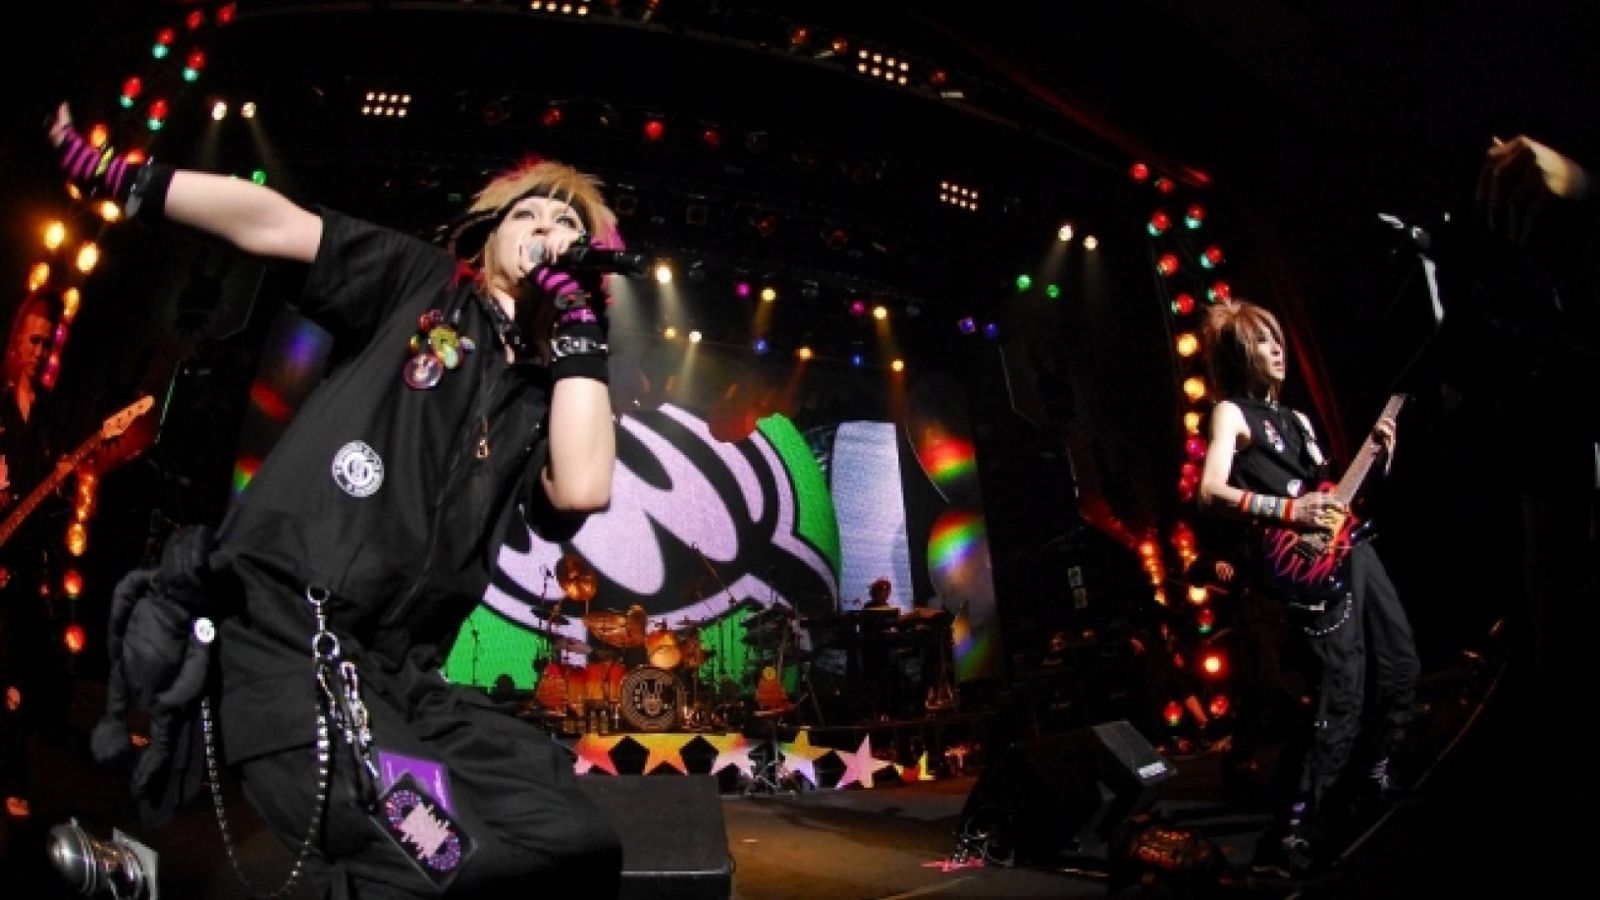 LM.C's ~☆Rock the PARTY☆'08~ © PONY CANYON INC.